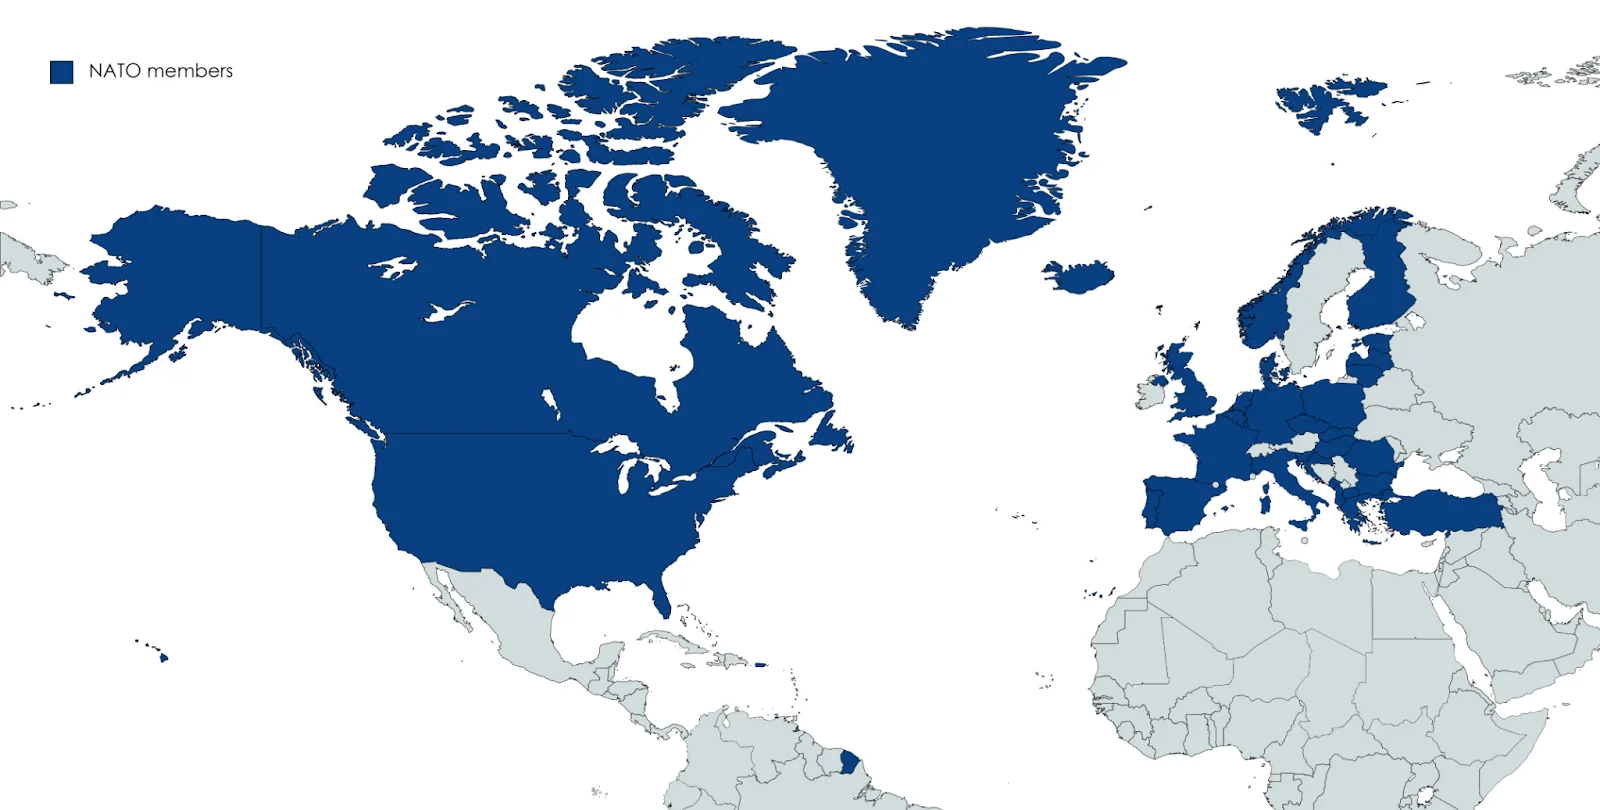 Fig. 7. NATO Member Countries, Targeted by Star Blizzard (Wikipedia)